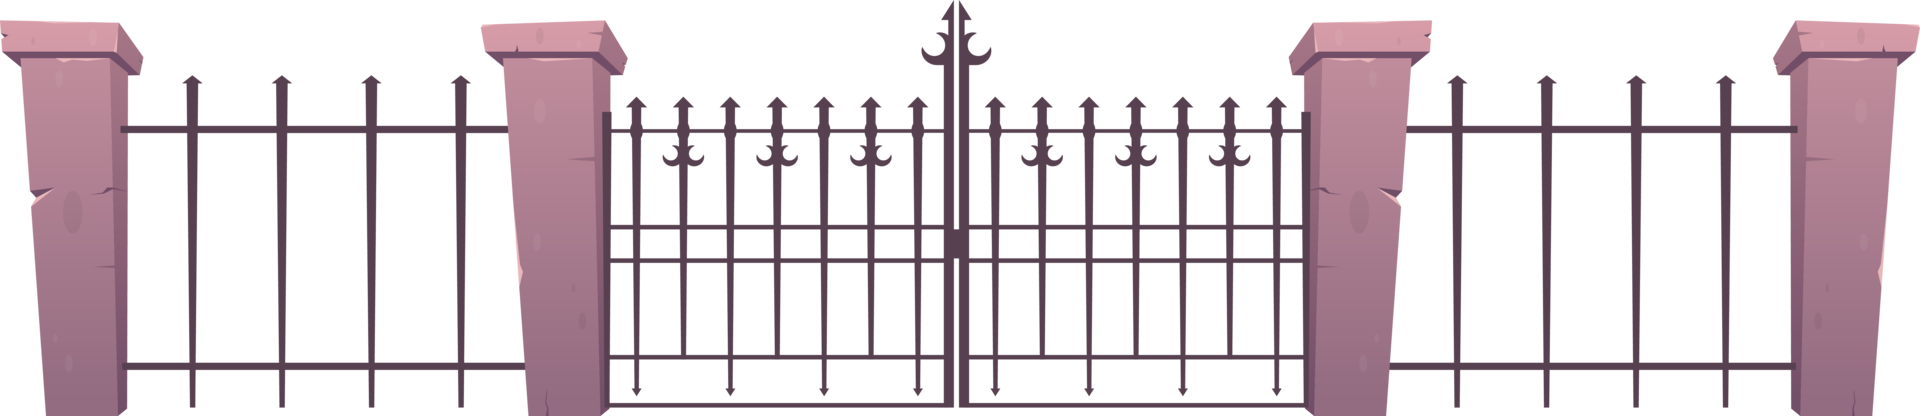 Entry fence made from steel and concrete in cartoon style png